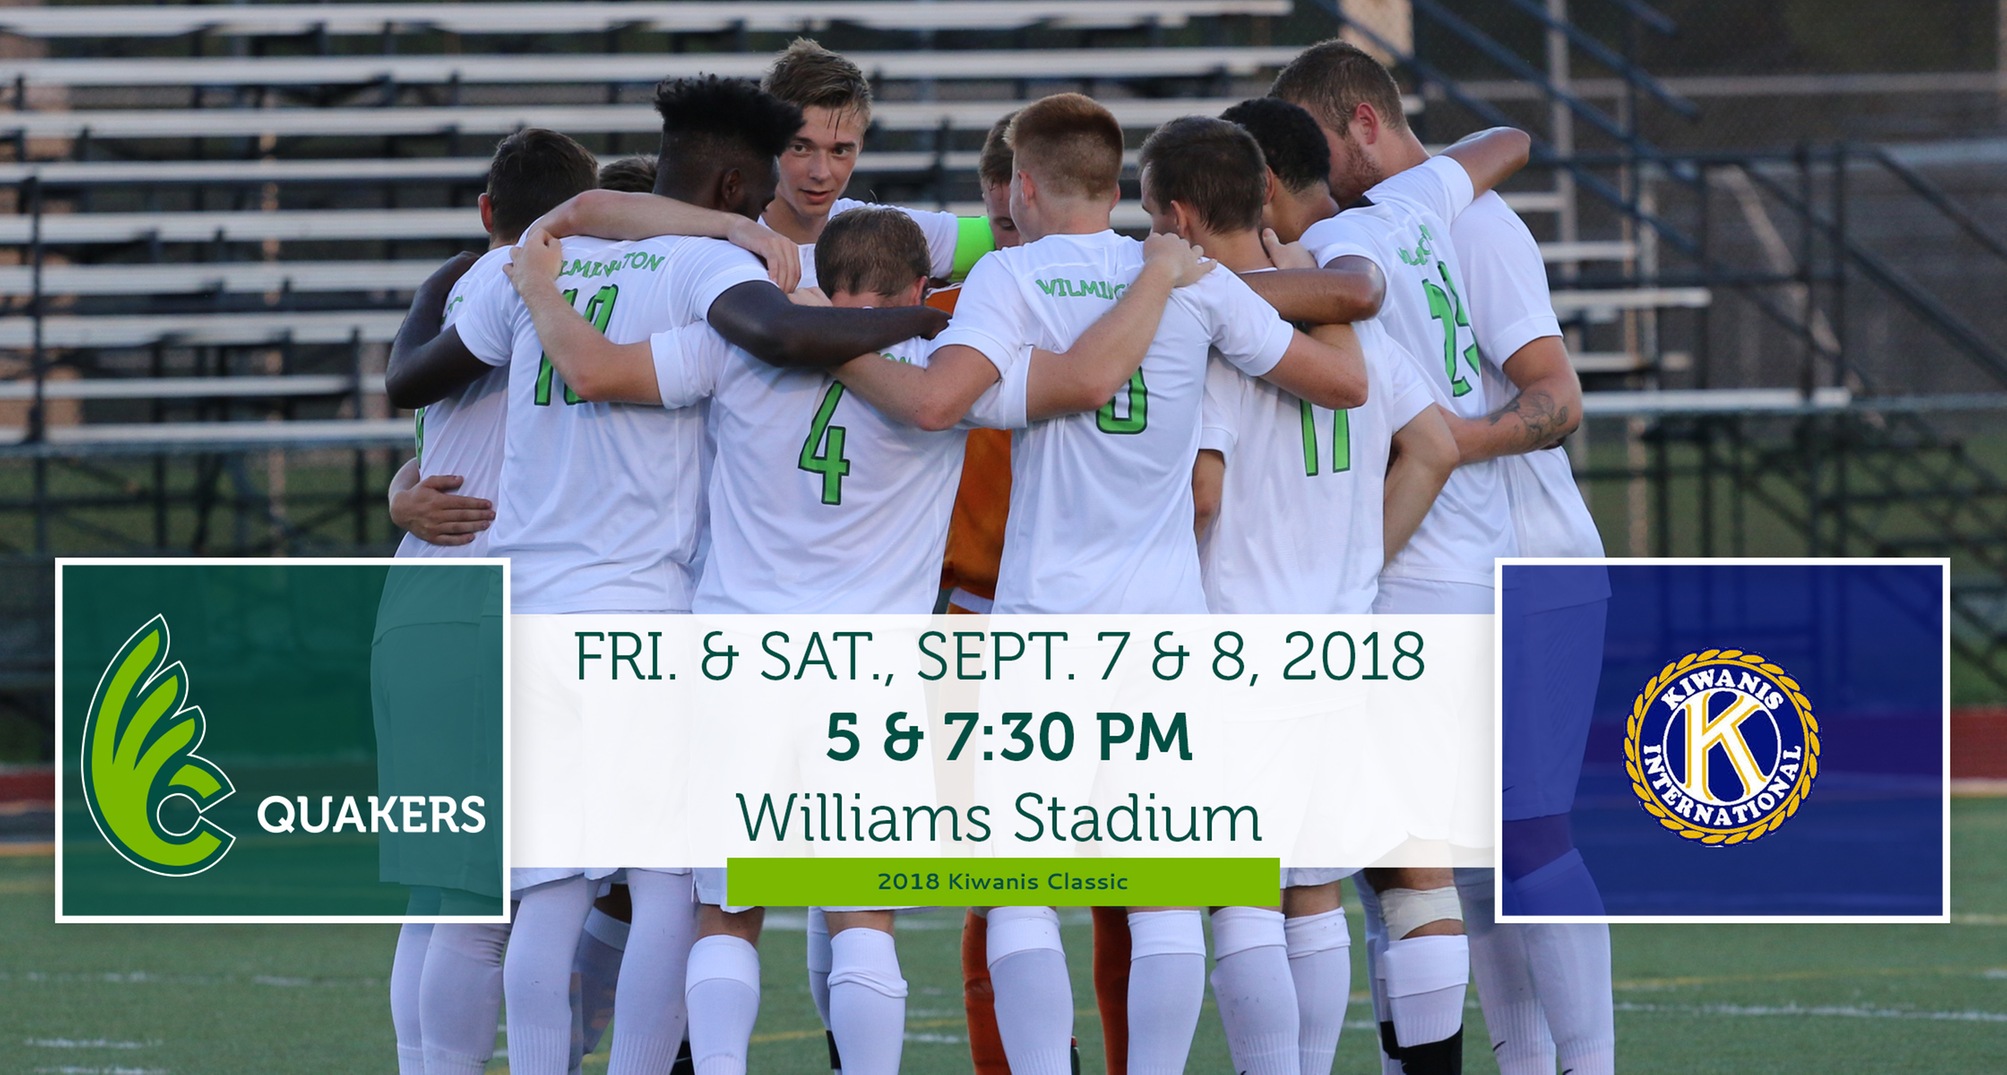 Men's Soccer to Host 2018 Kiwanis Classic This Weekend